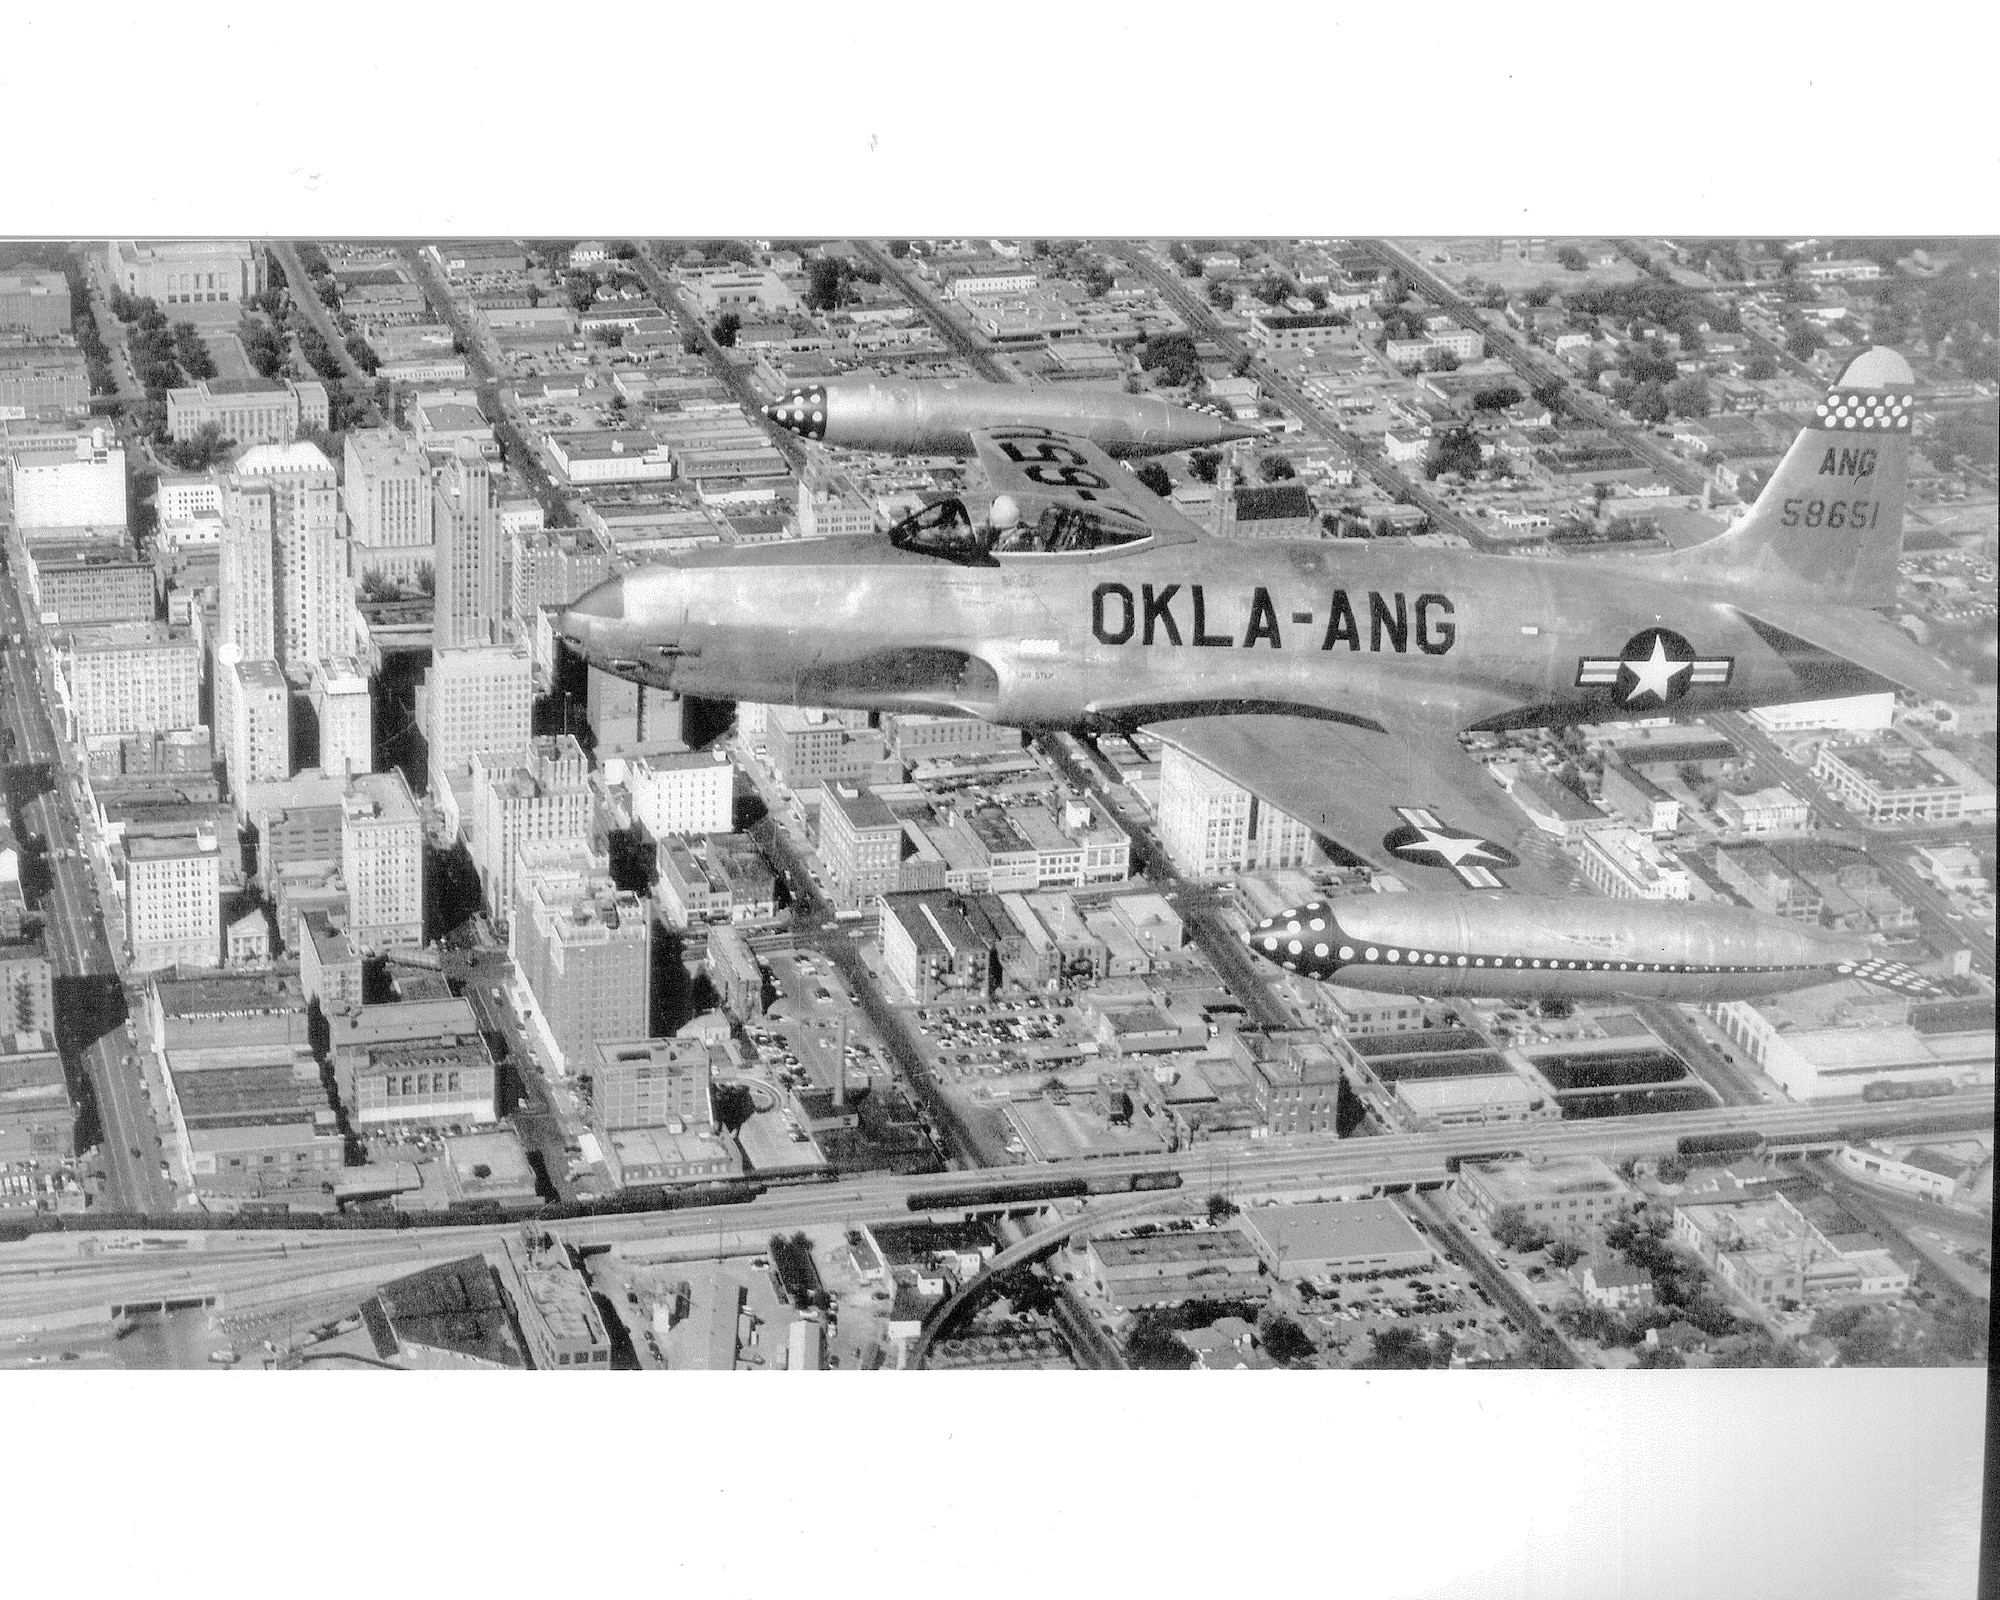 Black and white aerial photo of F-80 Shooting Star flying over a city.